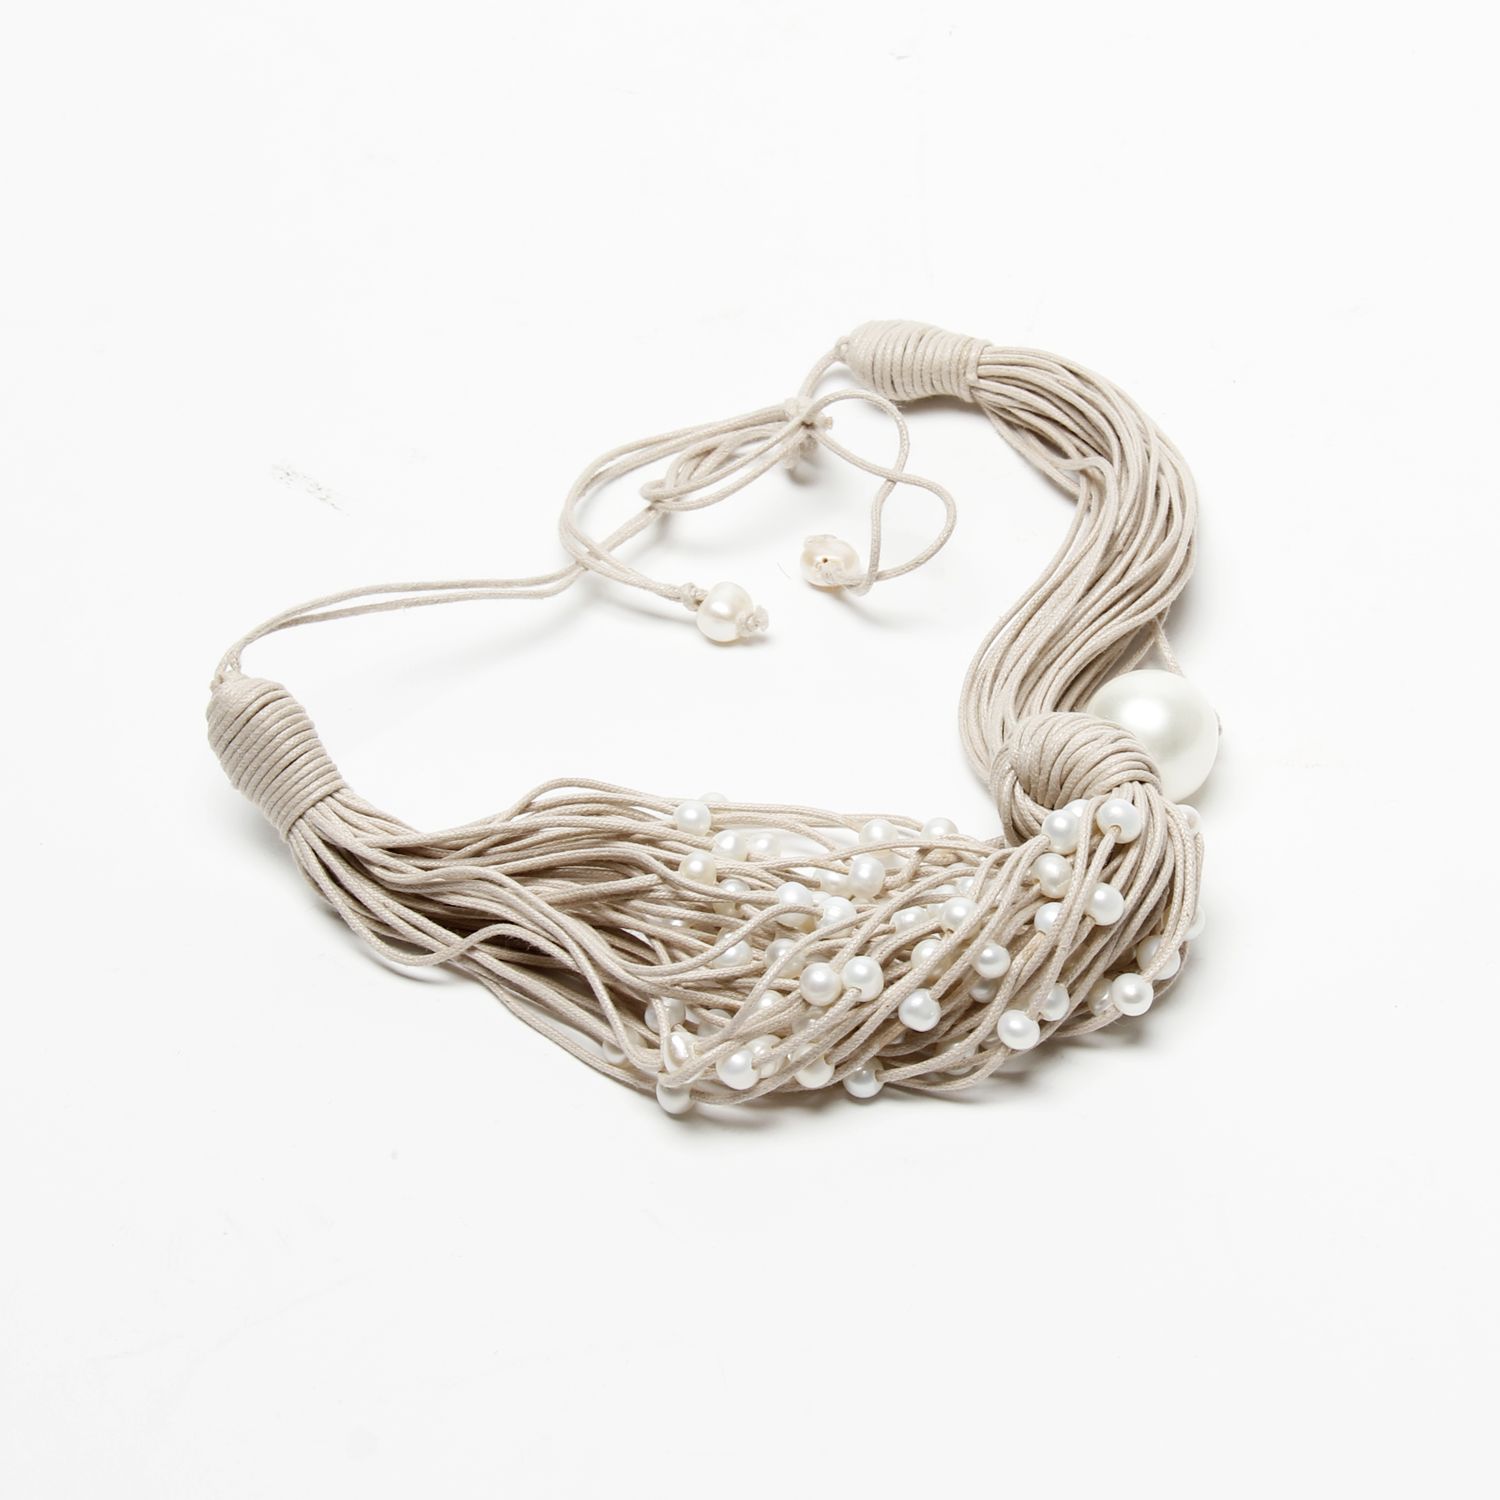 Oz & Ella Design: Pearl Scarf Necklace – Neutral Product Image 1 of 3